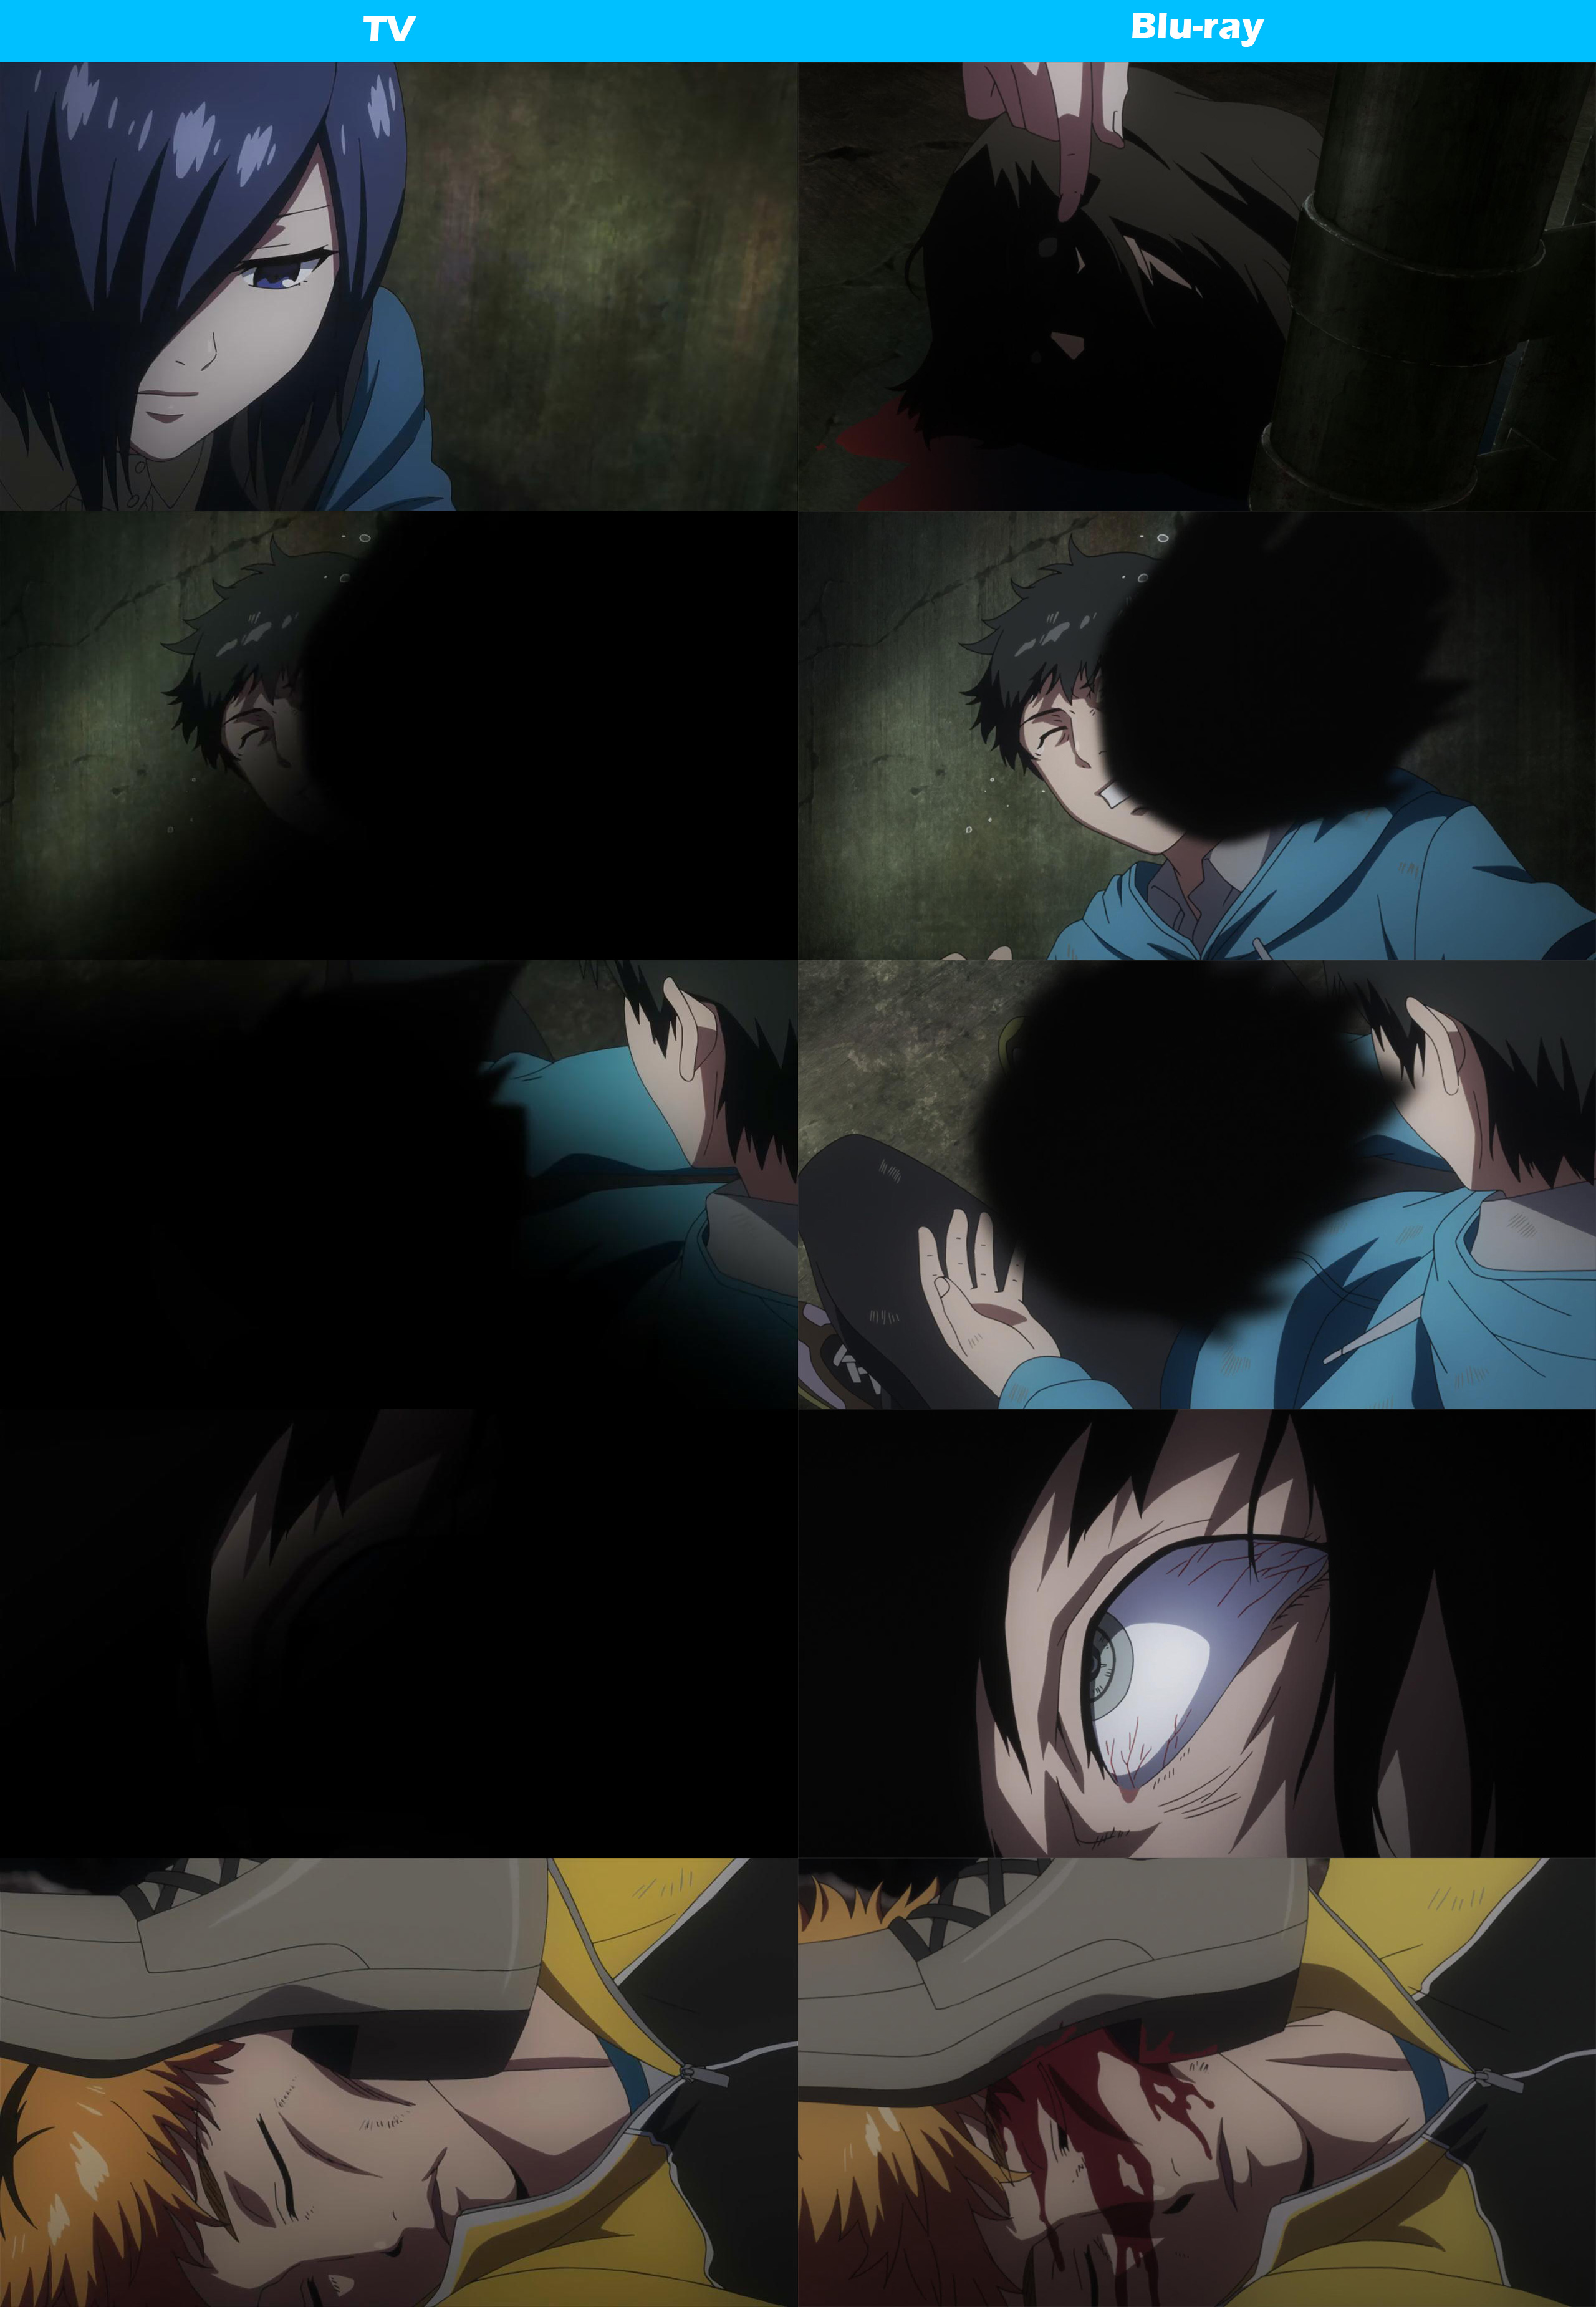 Tokyo-Ghoul---TV-and-Blu-ray-Comparison-Image-3